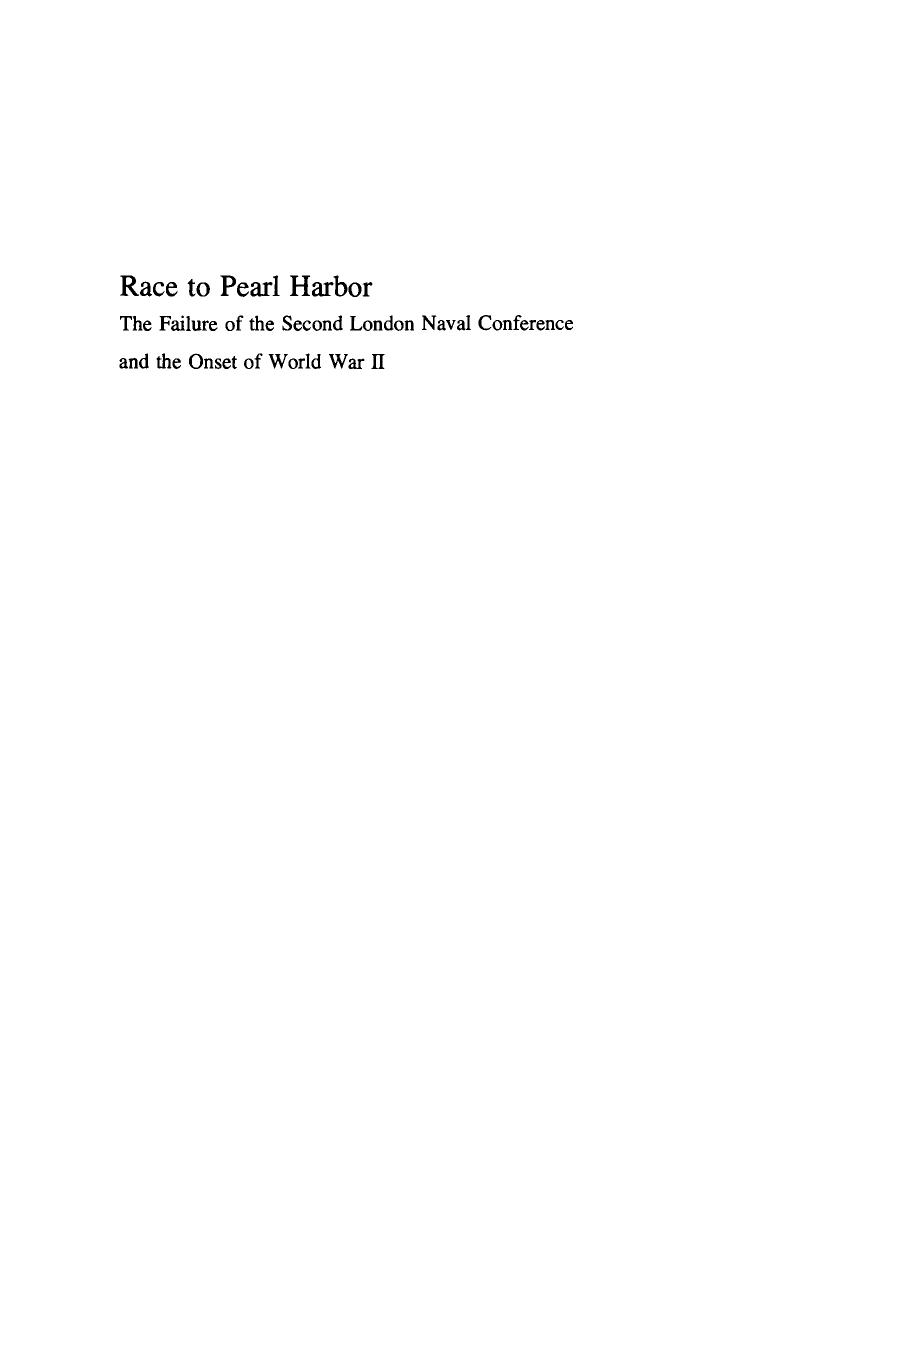 Race to Pearl Harbor: The Failure of the Second London Naval Conference and the Onset of World War II by Stephen E. Pelz